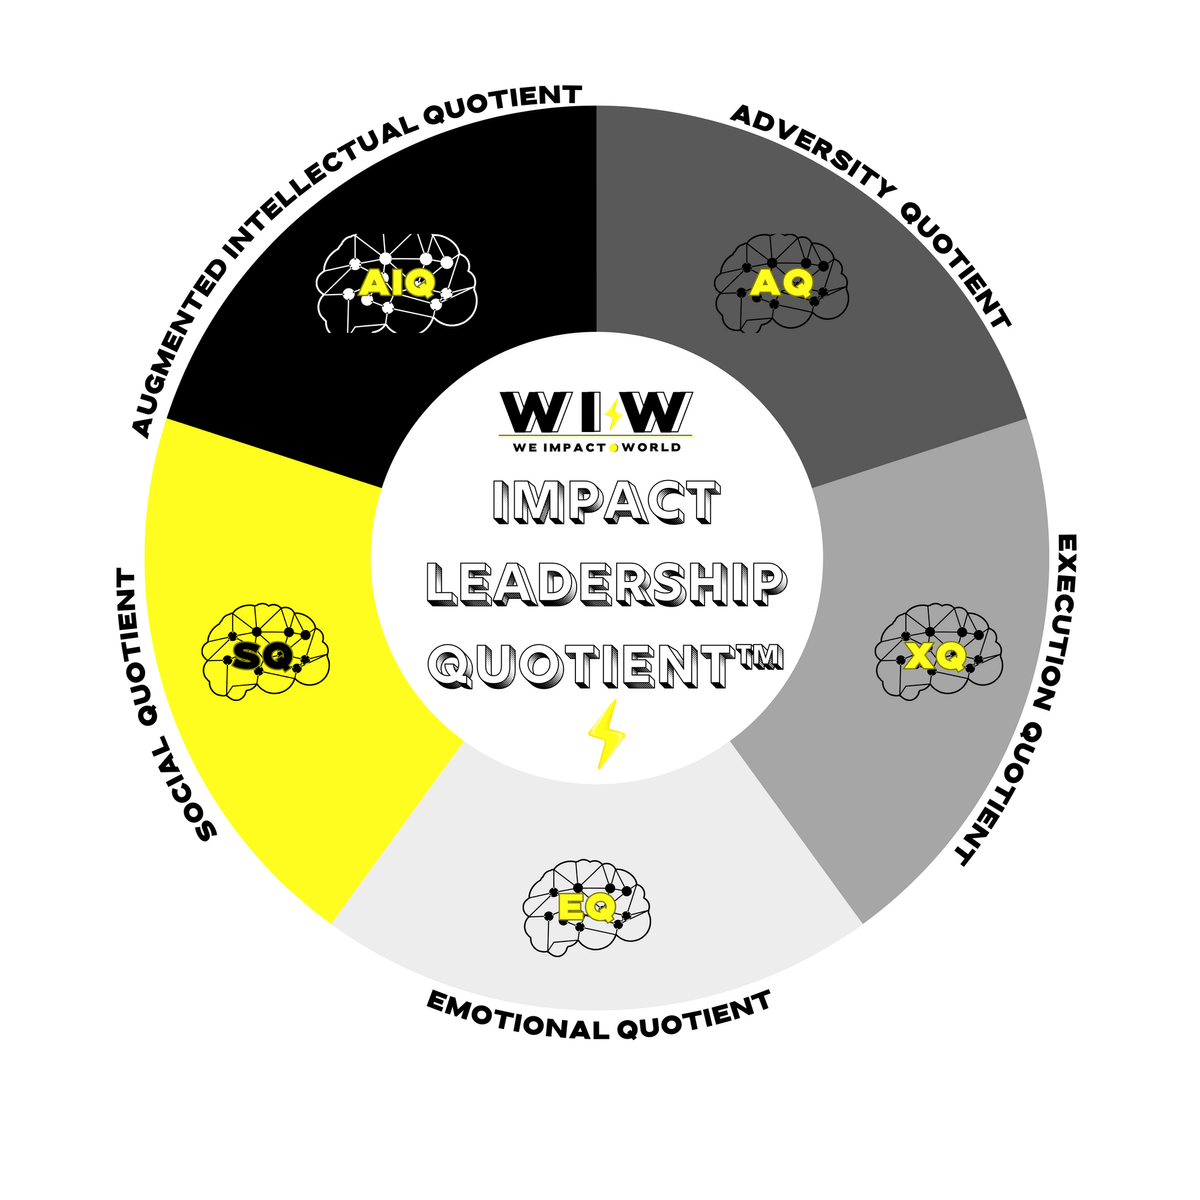 IMPACT-LEADERSHIP-QUOTIENT-WE-IMPACT-WORLD.png